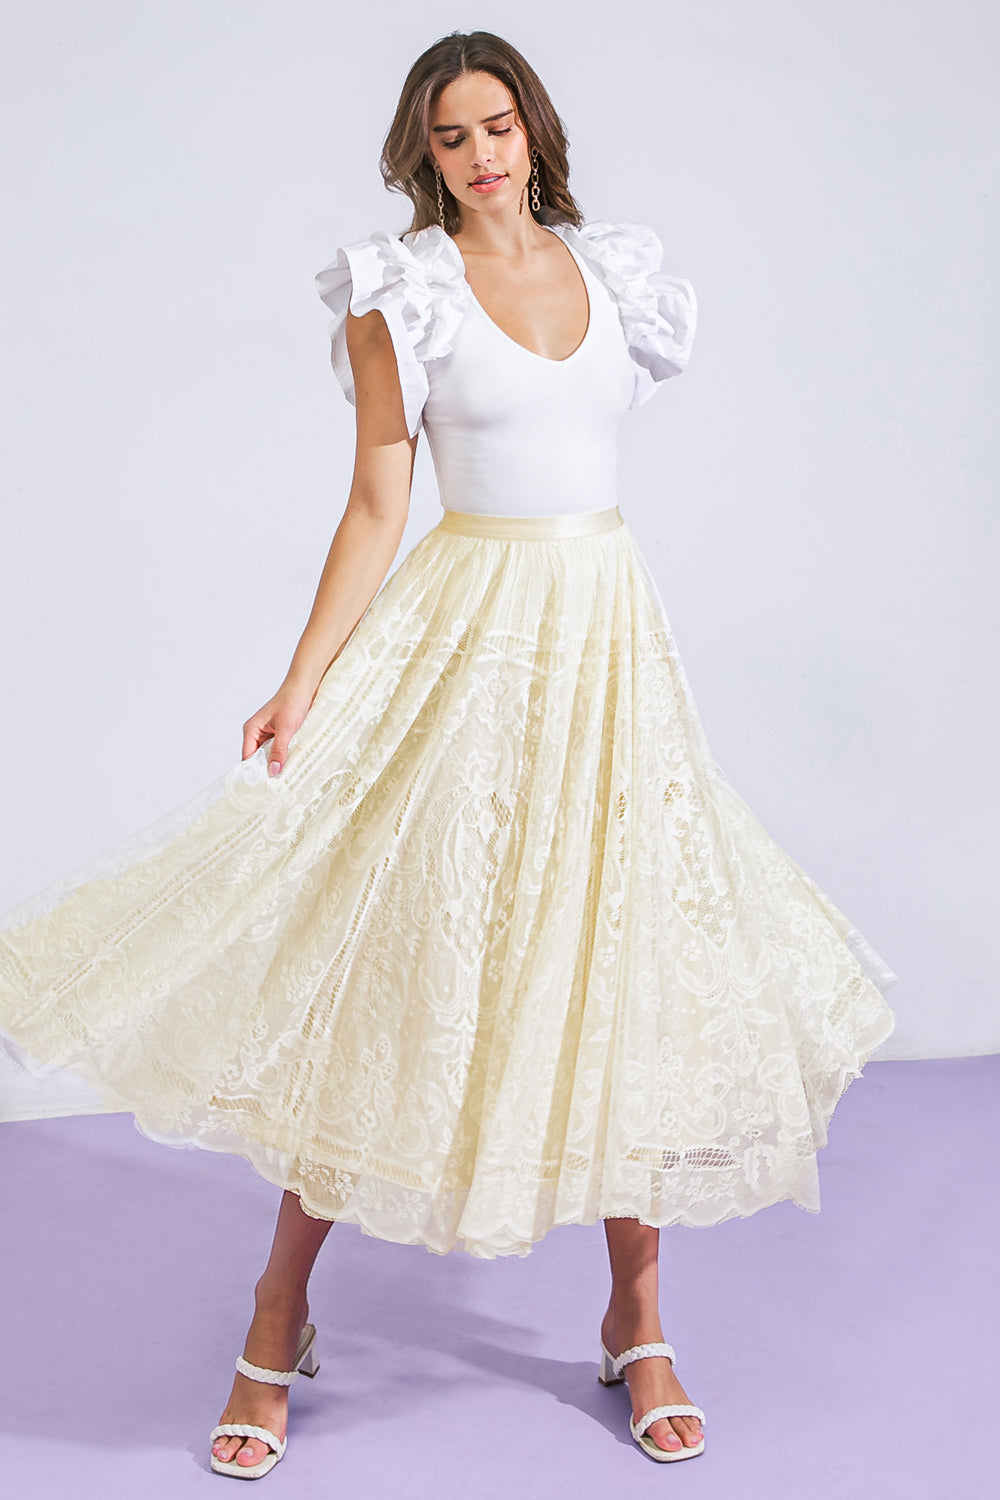 MEANINGFUL MOMENT WOVEN LACE MIDI SKIRT